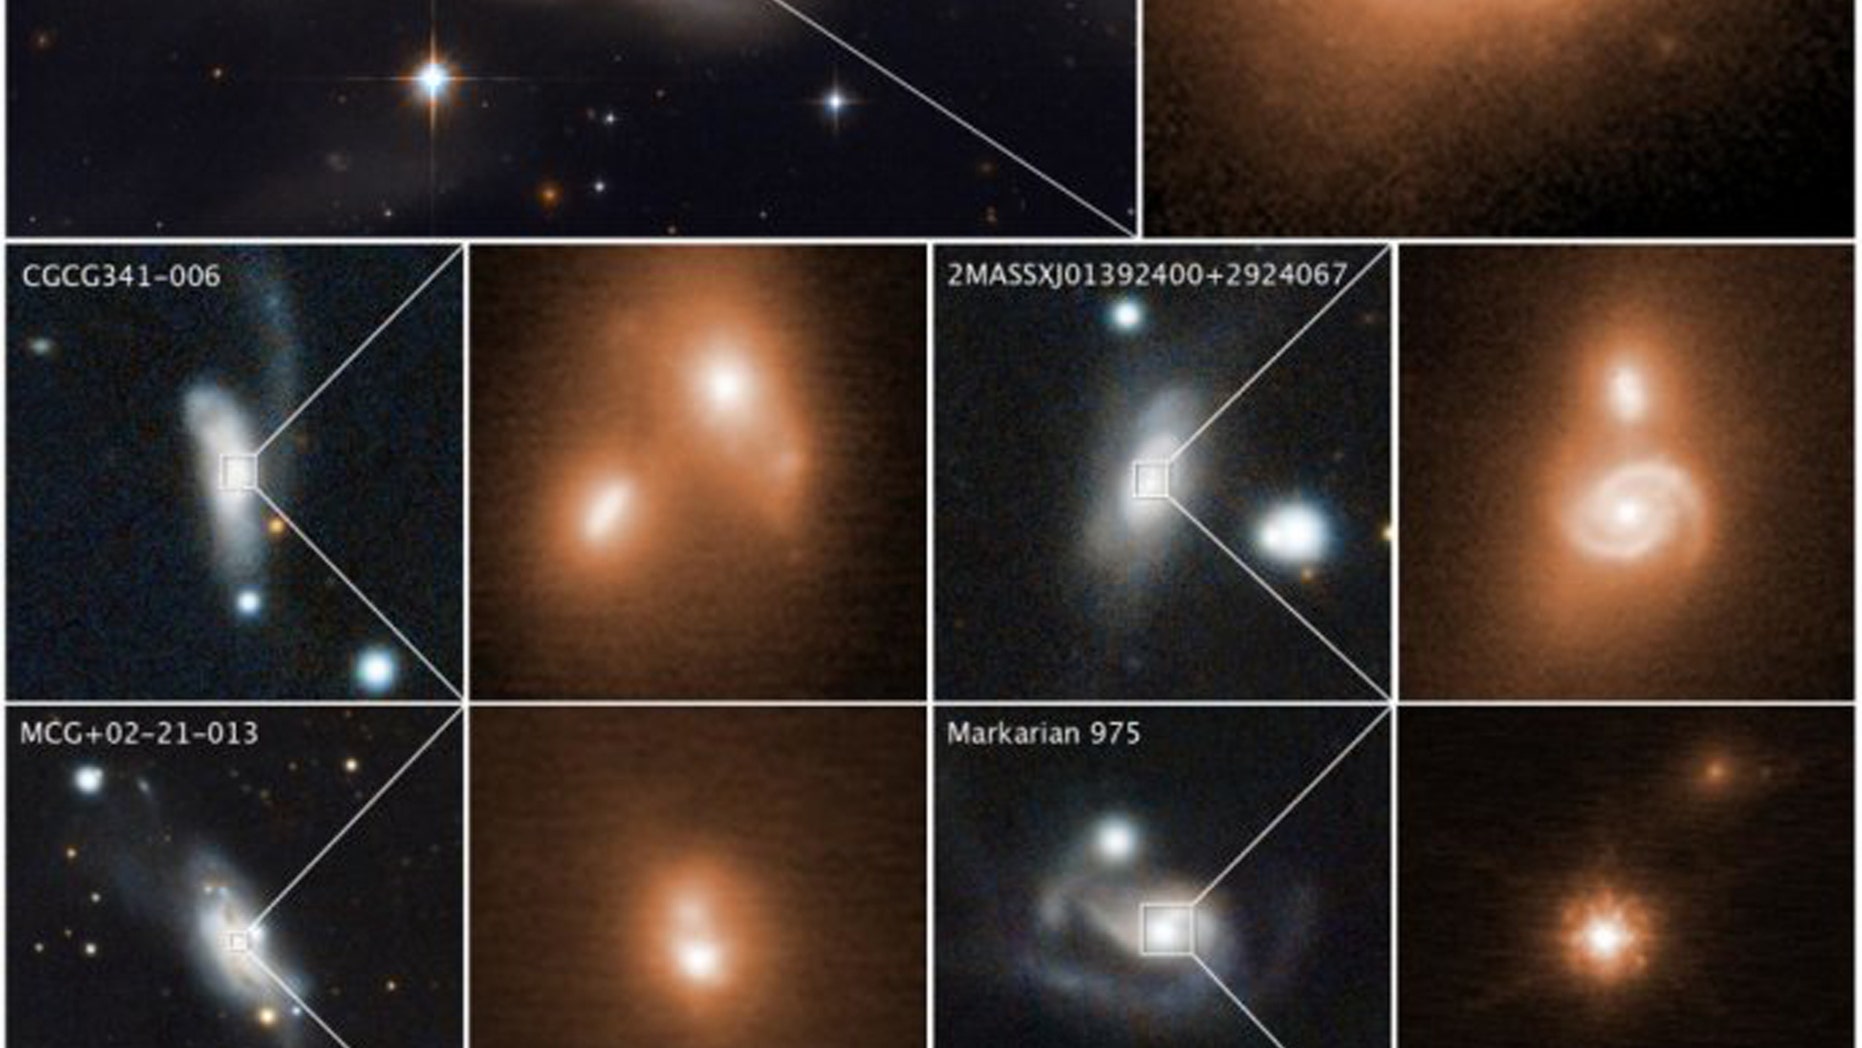 These images reveal the final stage of a union between pairs of galactic nuclei in the messy cores of colliding galaxies. Credit: NASA, ESA, and M. Koss (Eureka Scientific, Inc.)